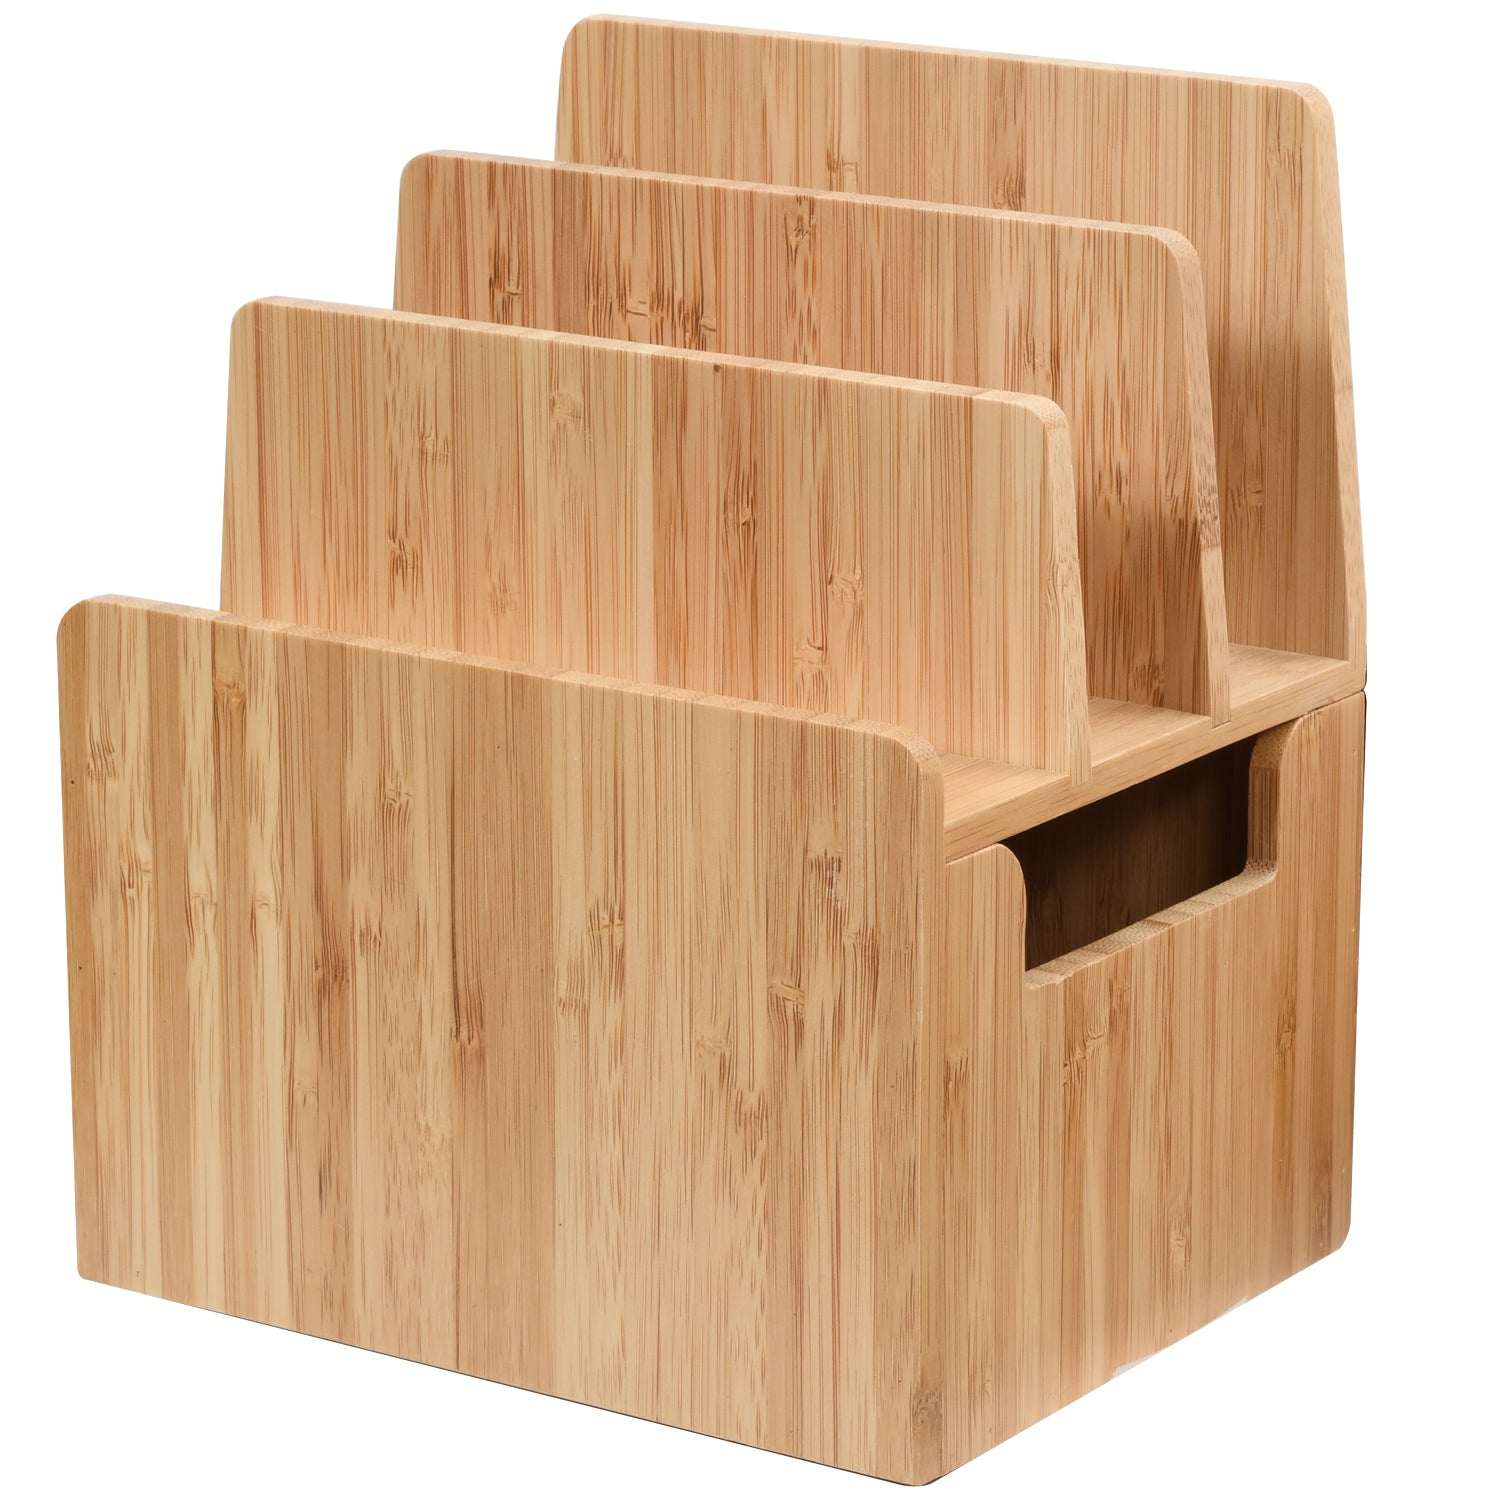 Mobilevision Bamboo Pot Lid Holder Organizer for Storage in Cabinets or Kitchen Countertops and Cupboards